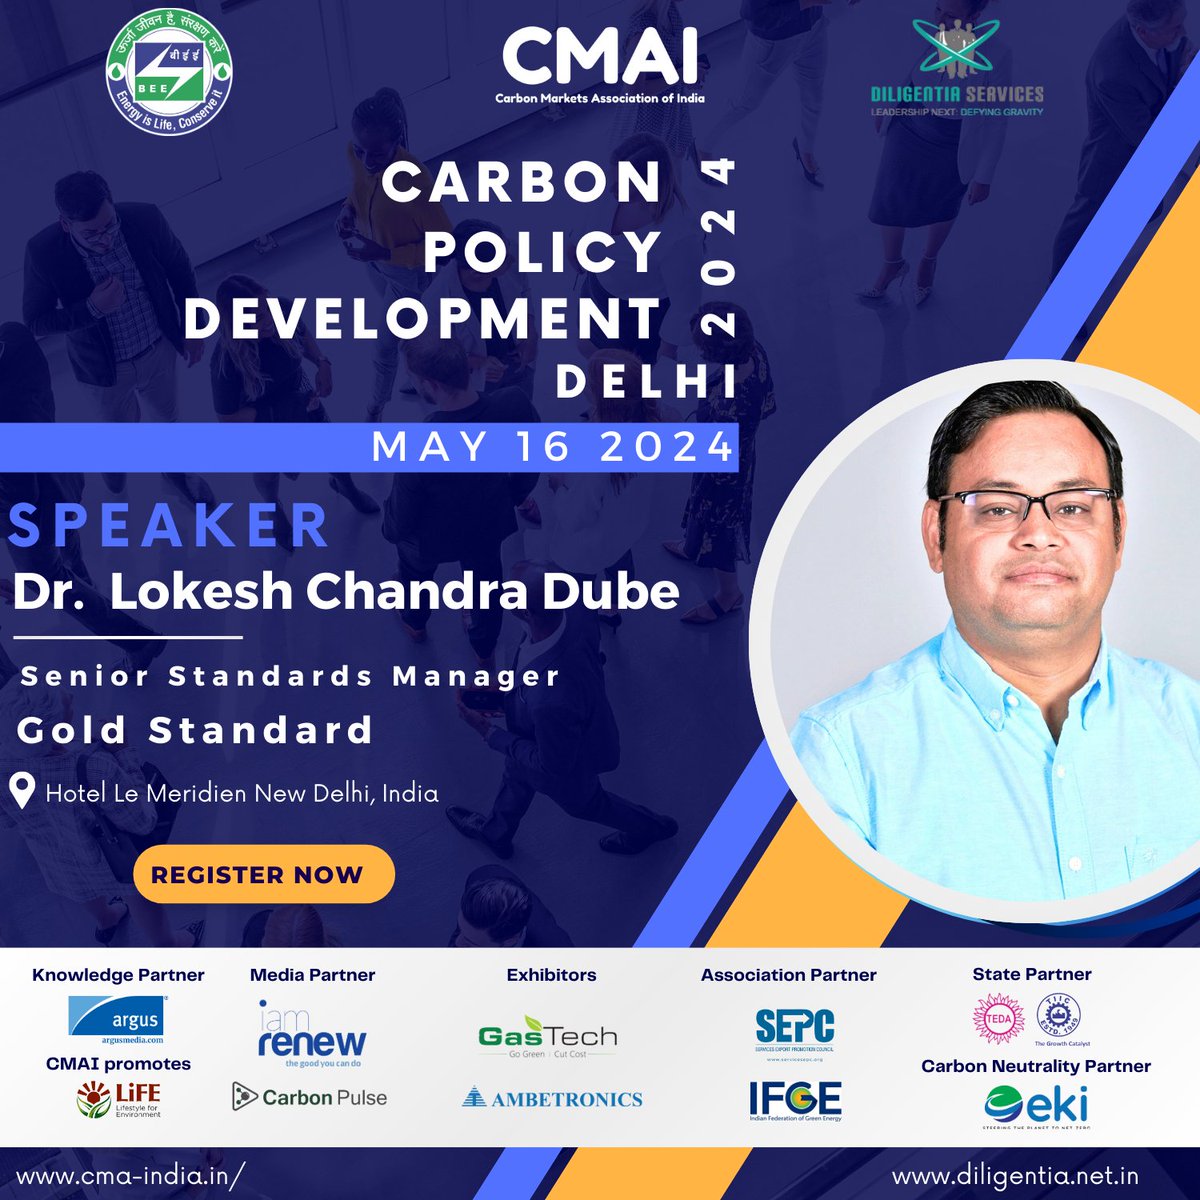 Introducing distinguished speaker slated to engage in exclusive #Policy #Dialogue centred on #CarbonMarket #Development, organized by #CMAI in collaboration with Diligentia Services. This insightful Dialogue is poised to stimulate action towards #NetZero future.